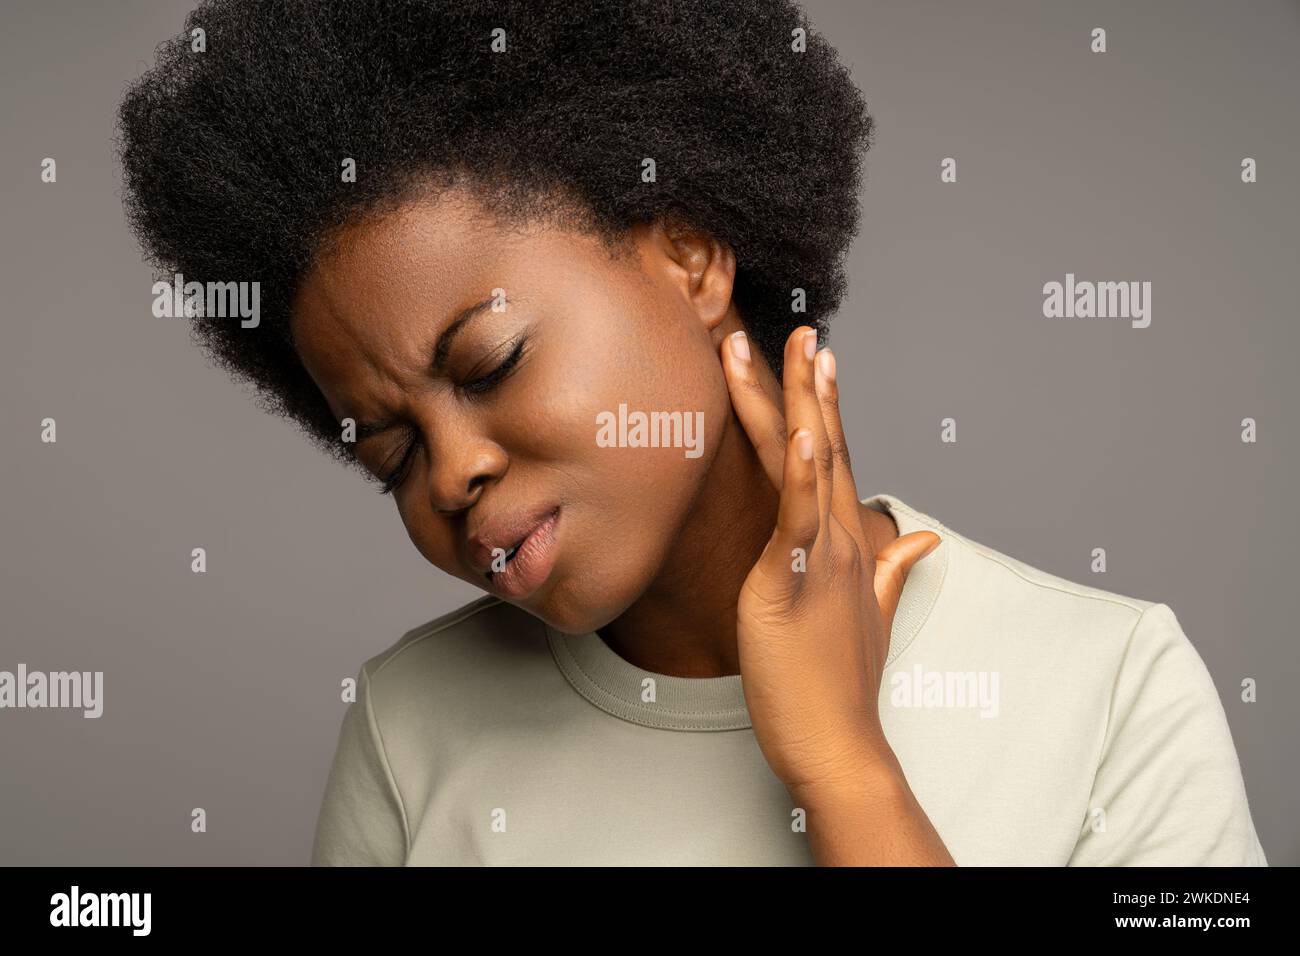 Black woman suffering from pain, touching enlarged lymph glands, having symptoms of flu, cold, virus Stock Photo